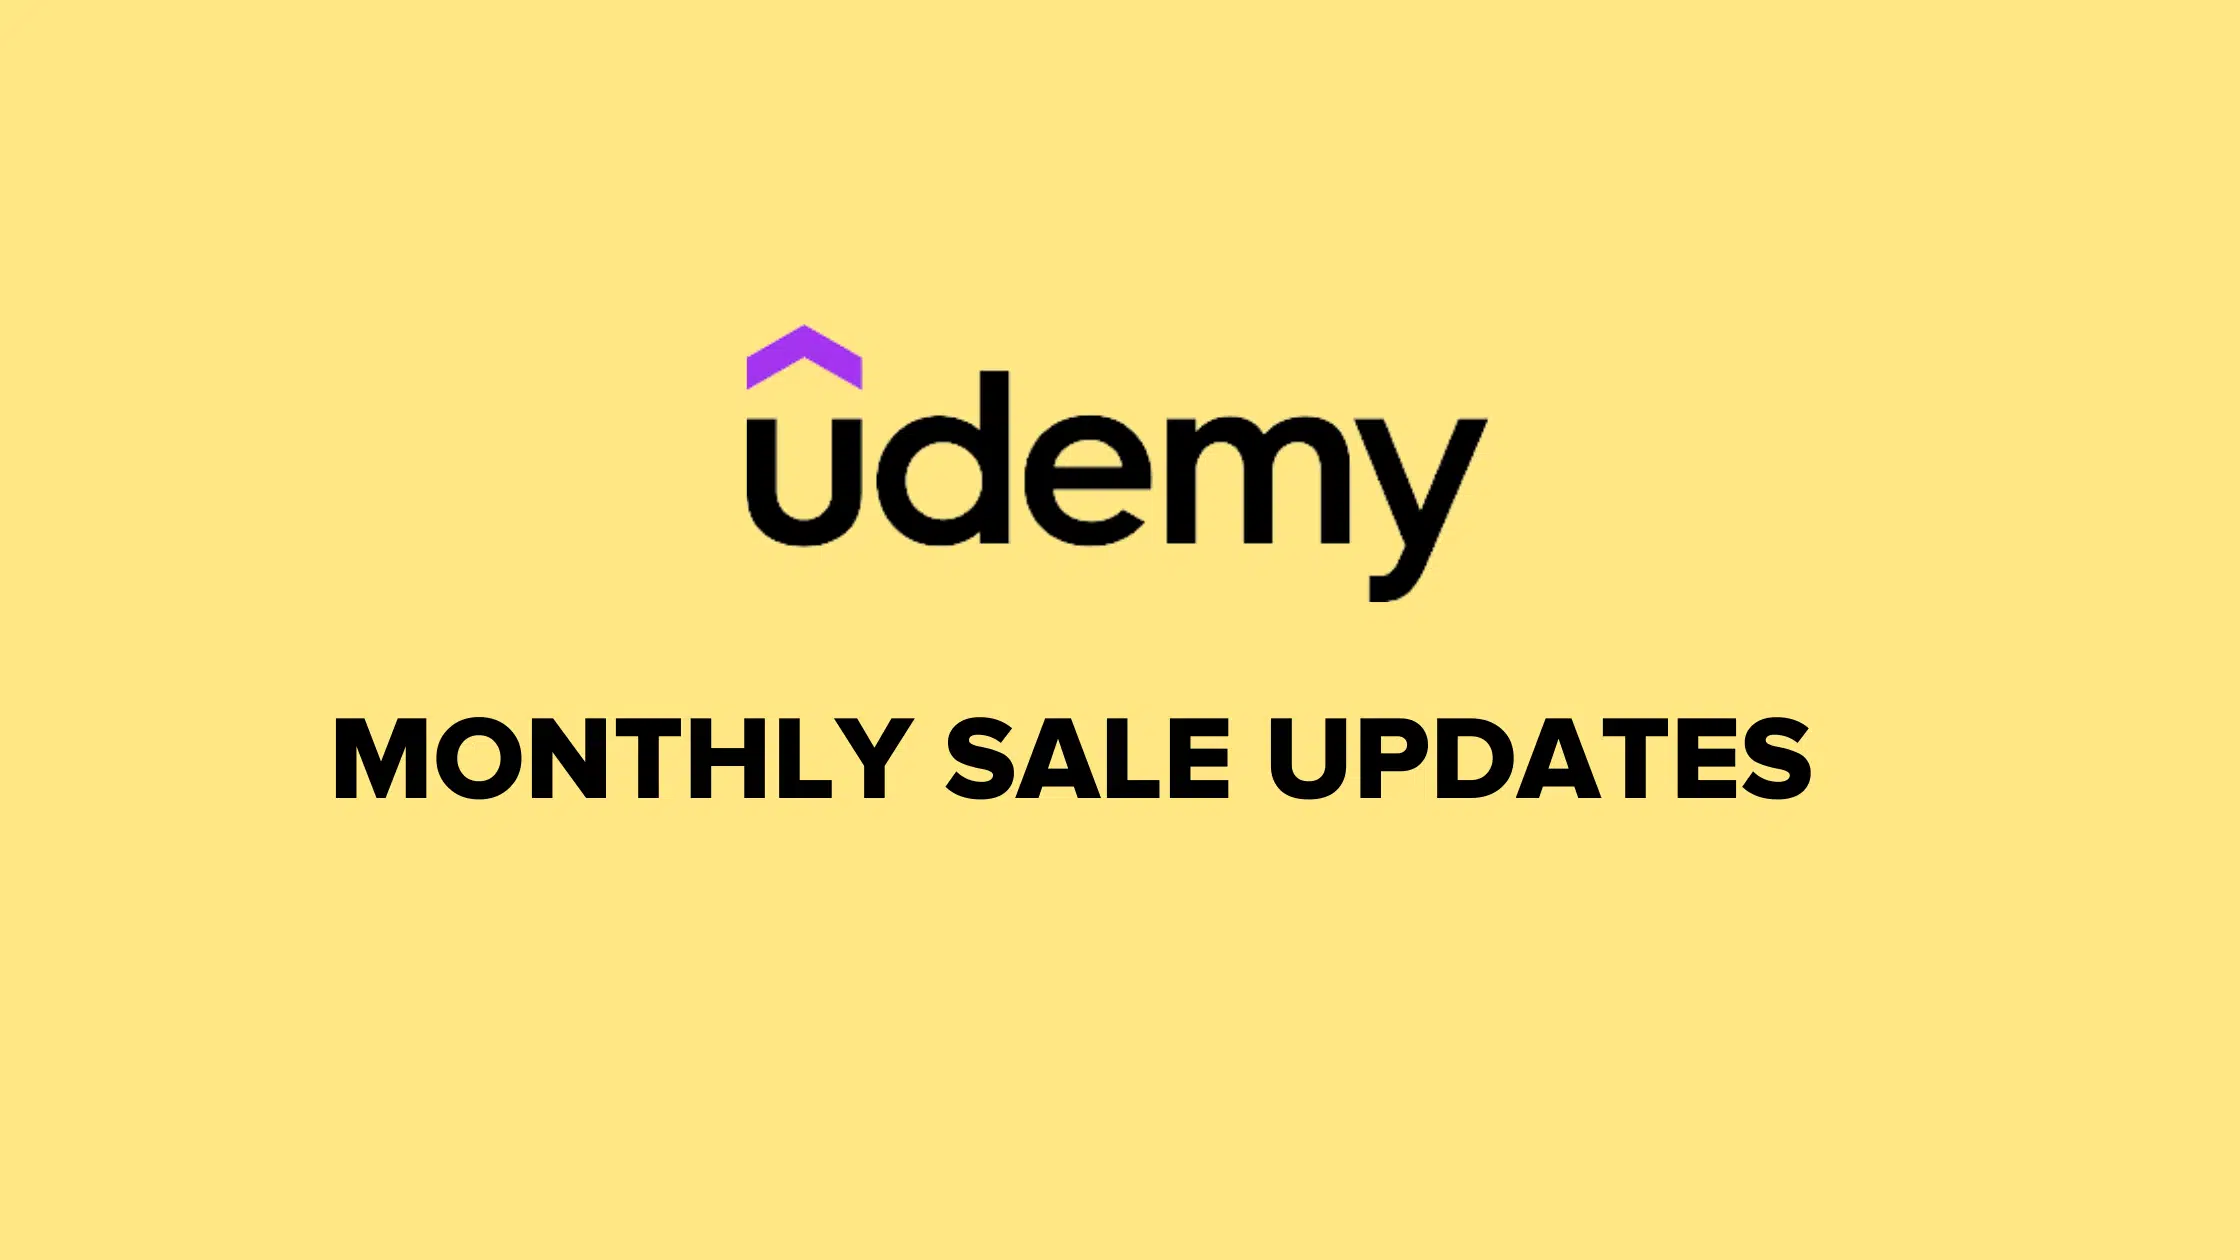 Are Udemy Courses Always On Sale